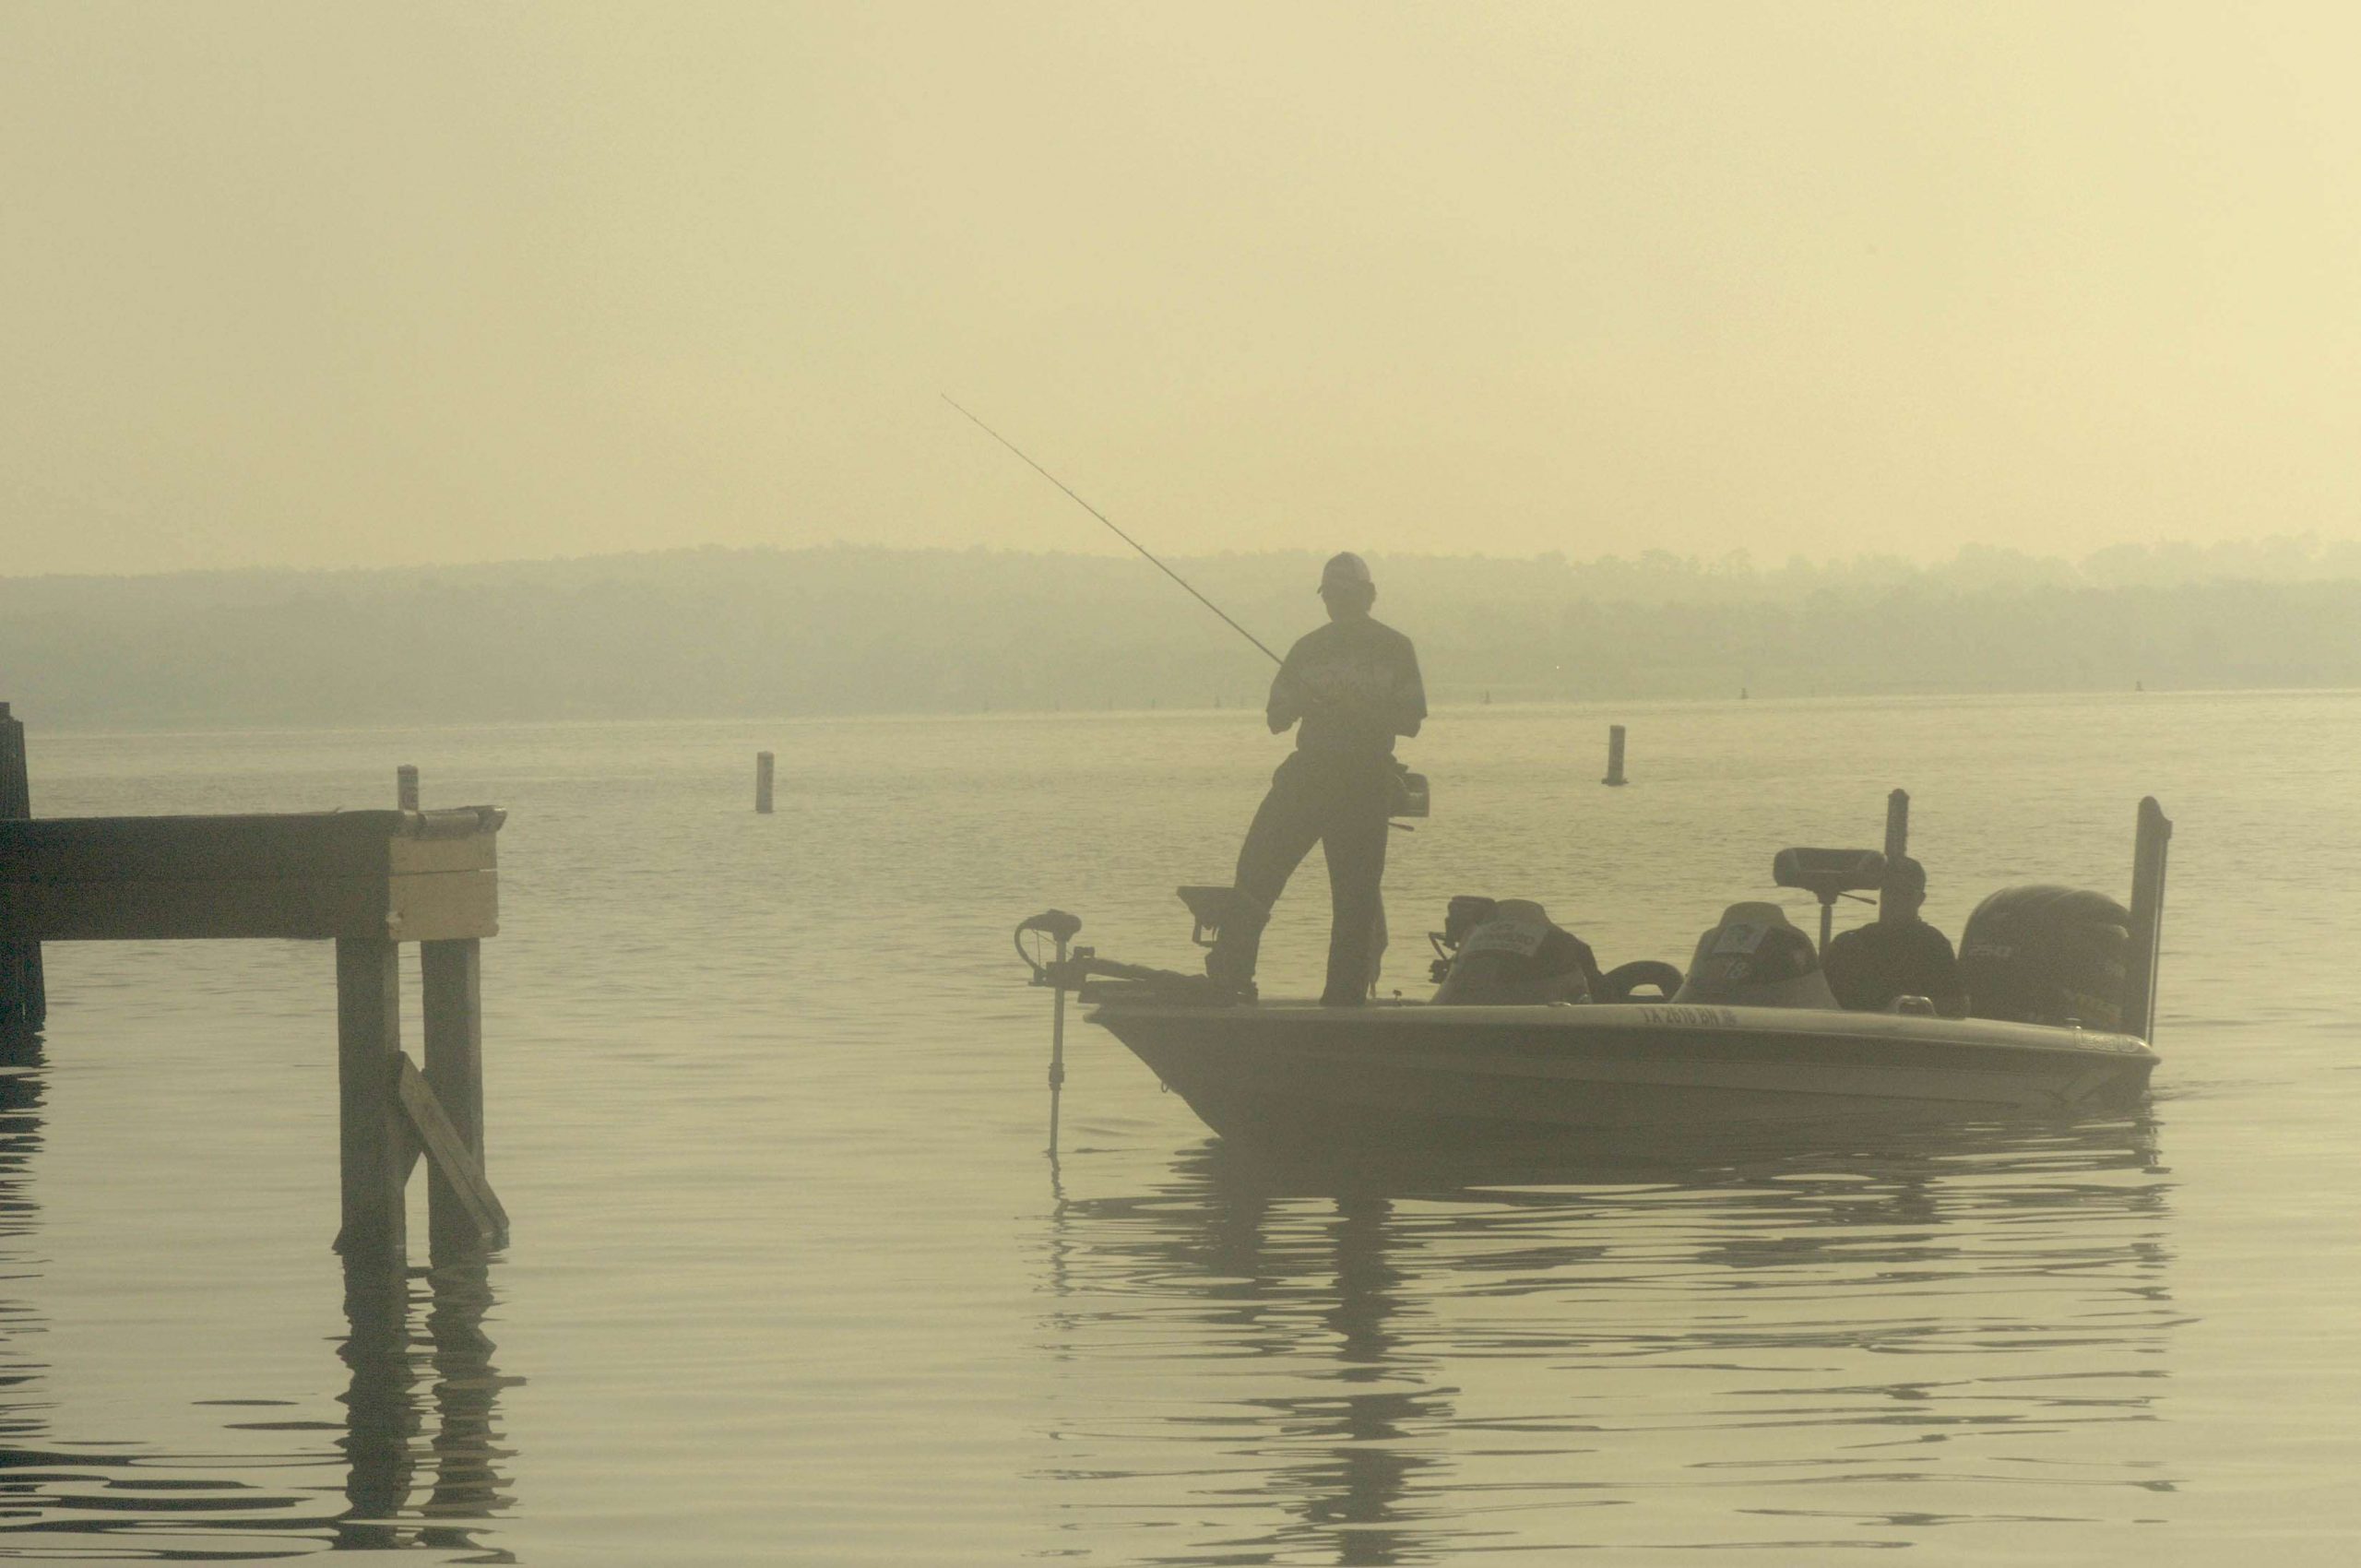 During its 48-year history, B.A.S.S. has not hosted a tournament on Lake Conroe, which is located north of Houston.